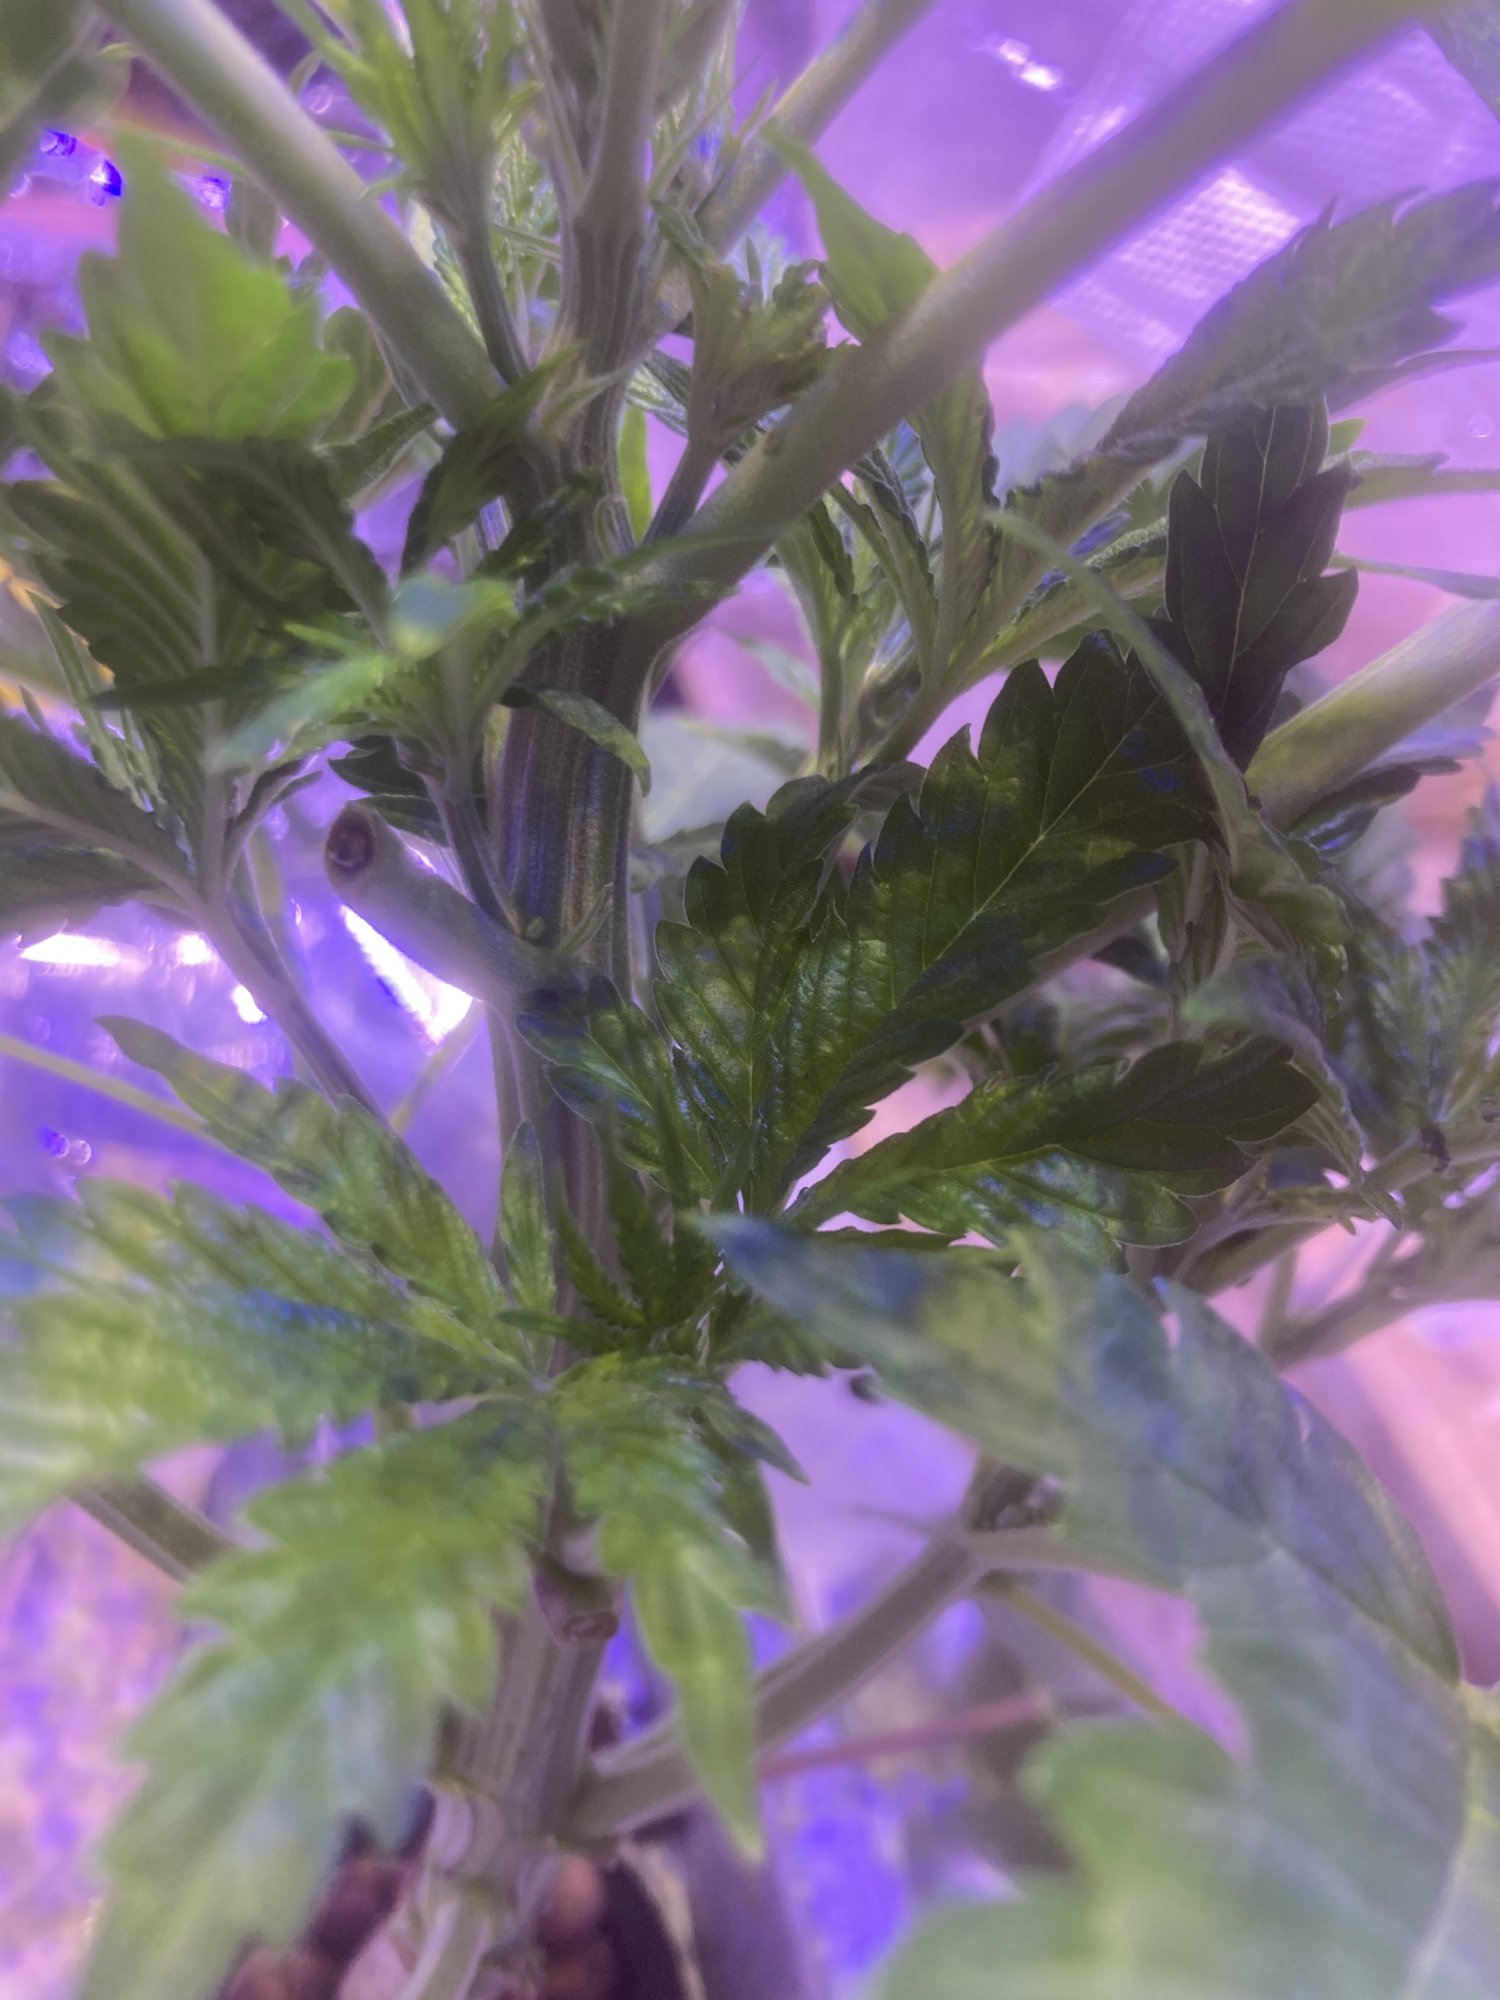 Root rot issues may have turned plant 4